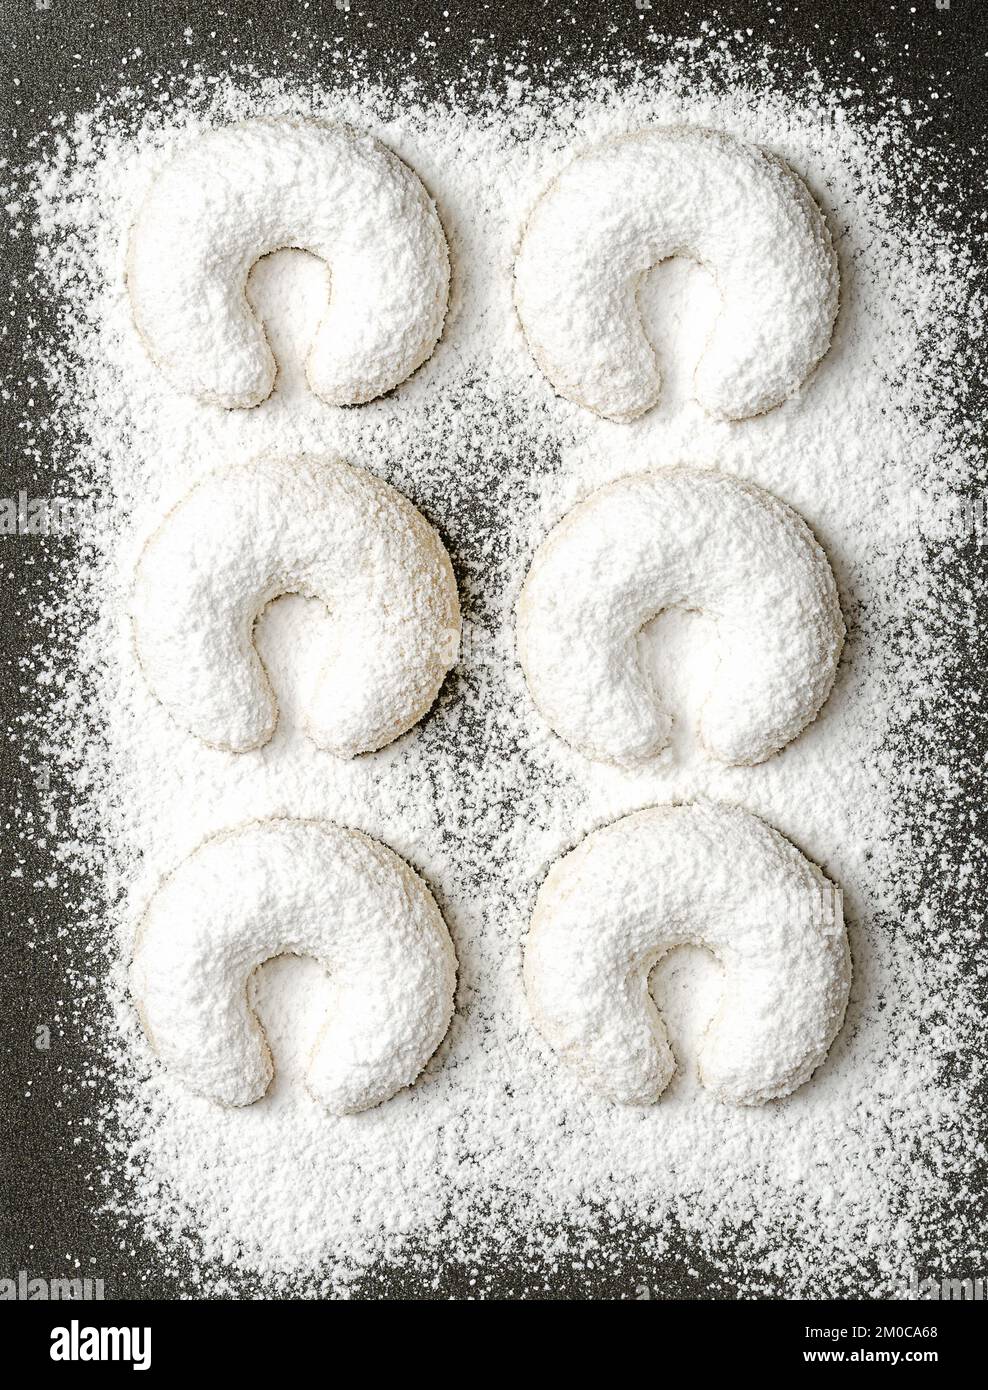 With vanilla sugar heavy dusted vanilla crescents, Vanillekipferl on a baking tray. Crescent shaped Christmas biscuits, originally from Austria. Stock Photo